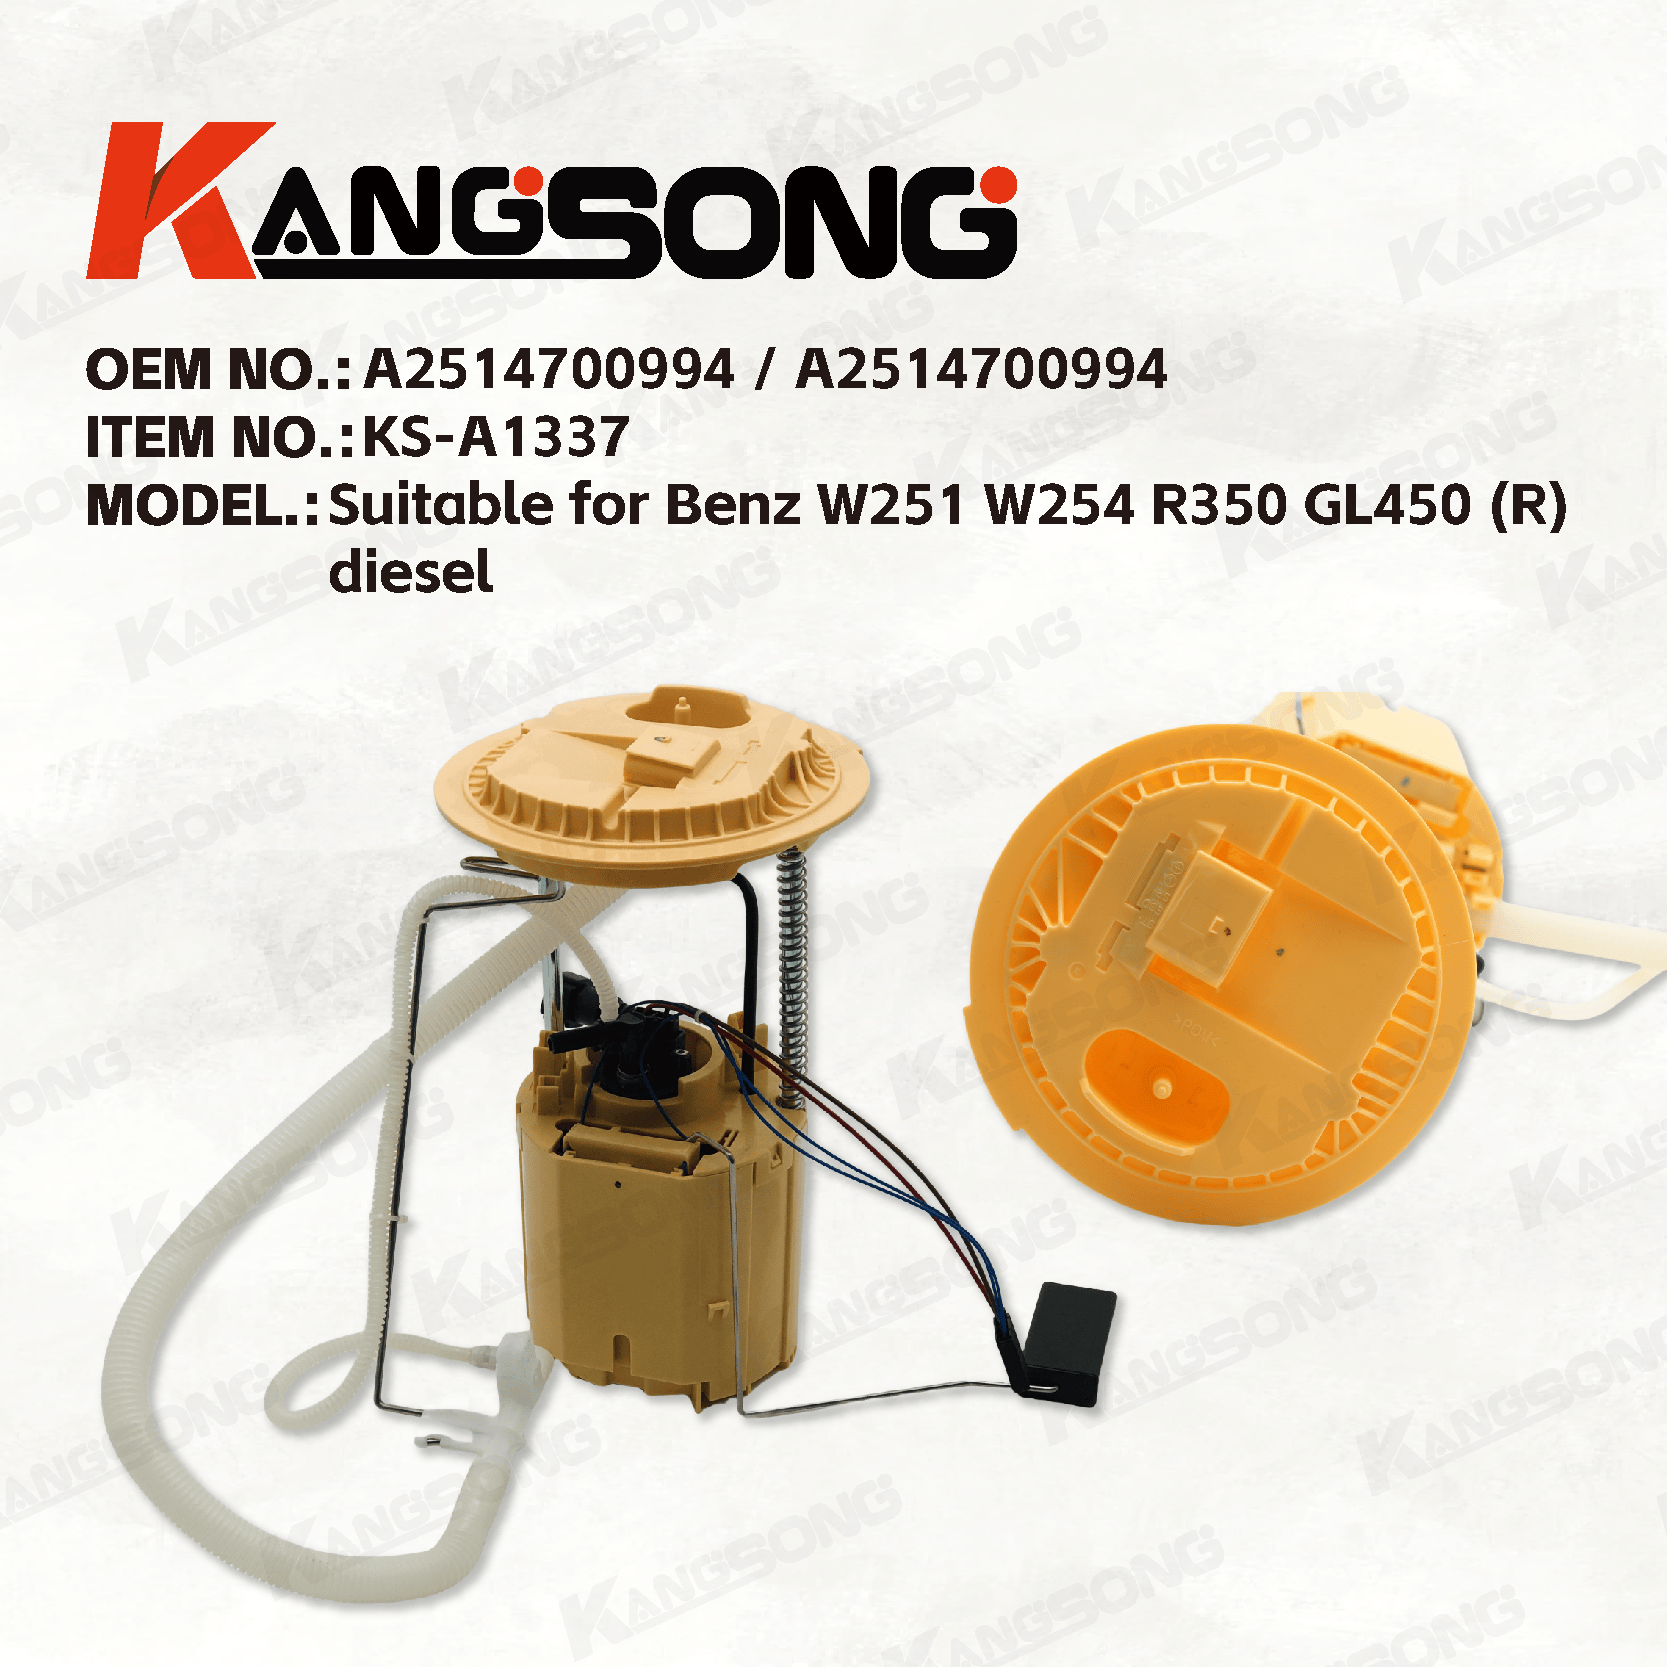 Applicable to Mercedes-Benz W251 W254 R350 GL450 (R) diesel /A251 470 0994 / A2514700994/Fuel Pump Assembly/KS-A1337